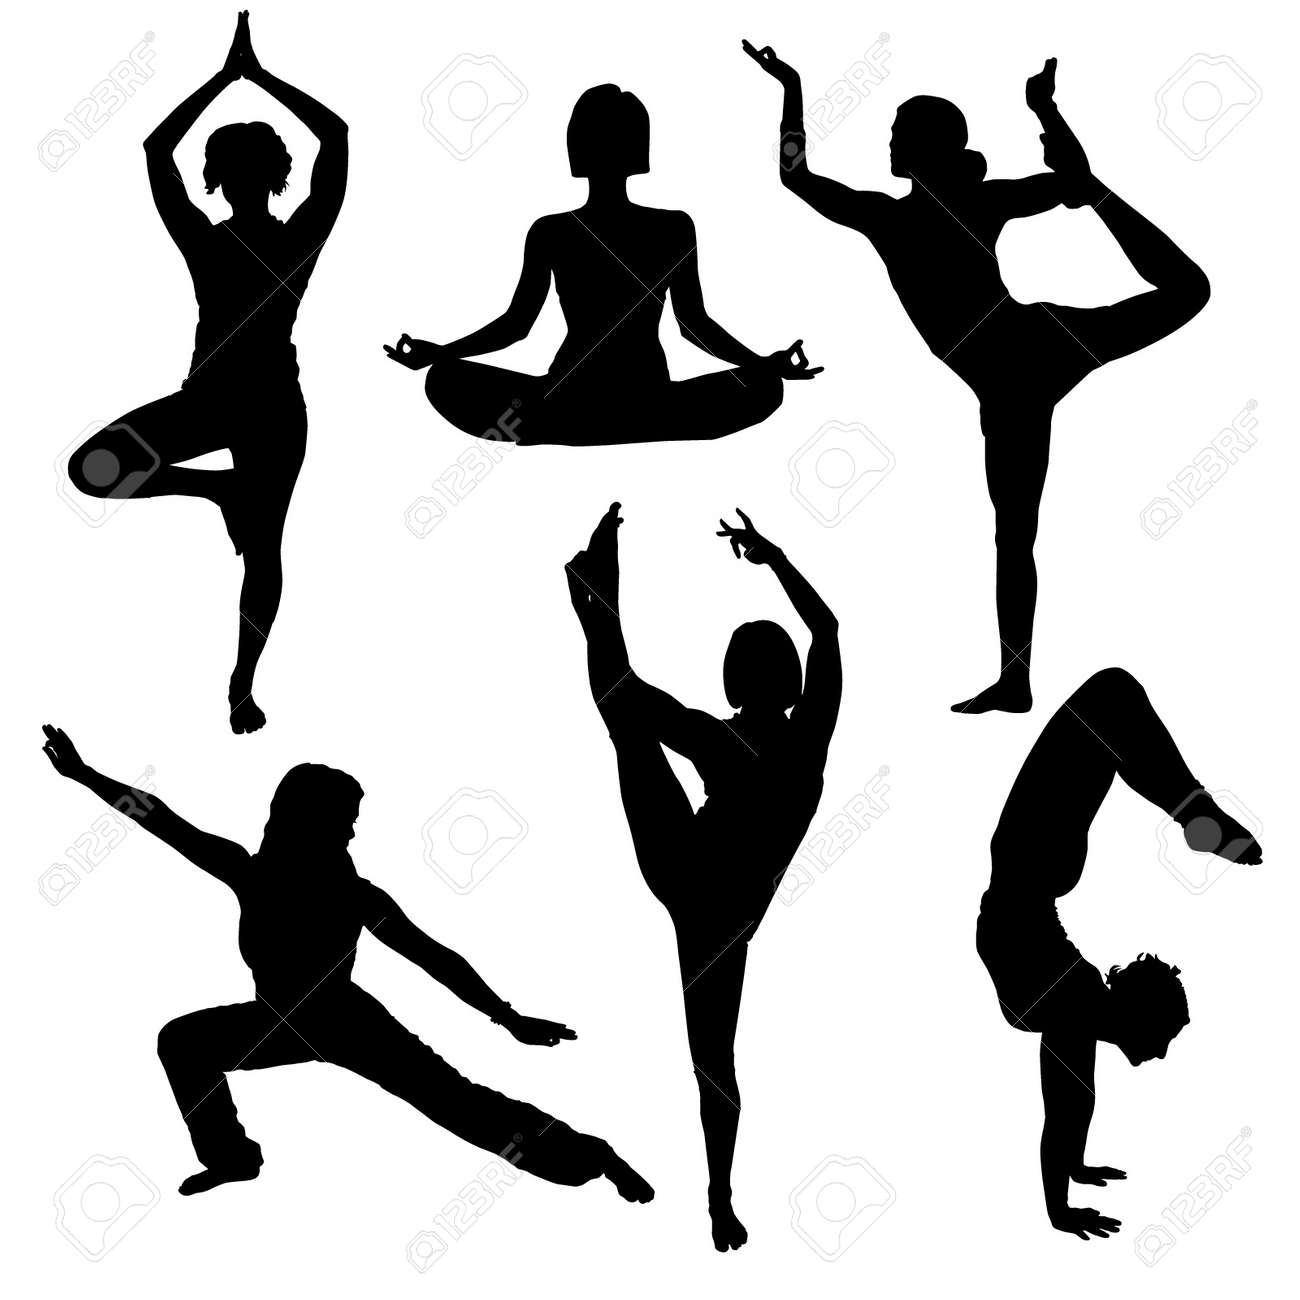 Yoga Silhouette On White Background Royalty Free Cliparts Vectors